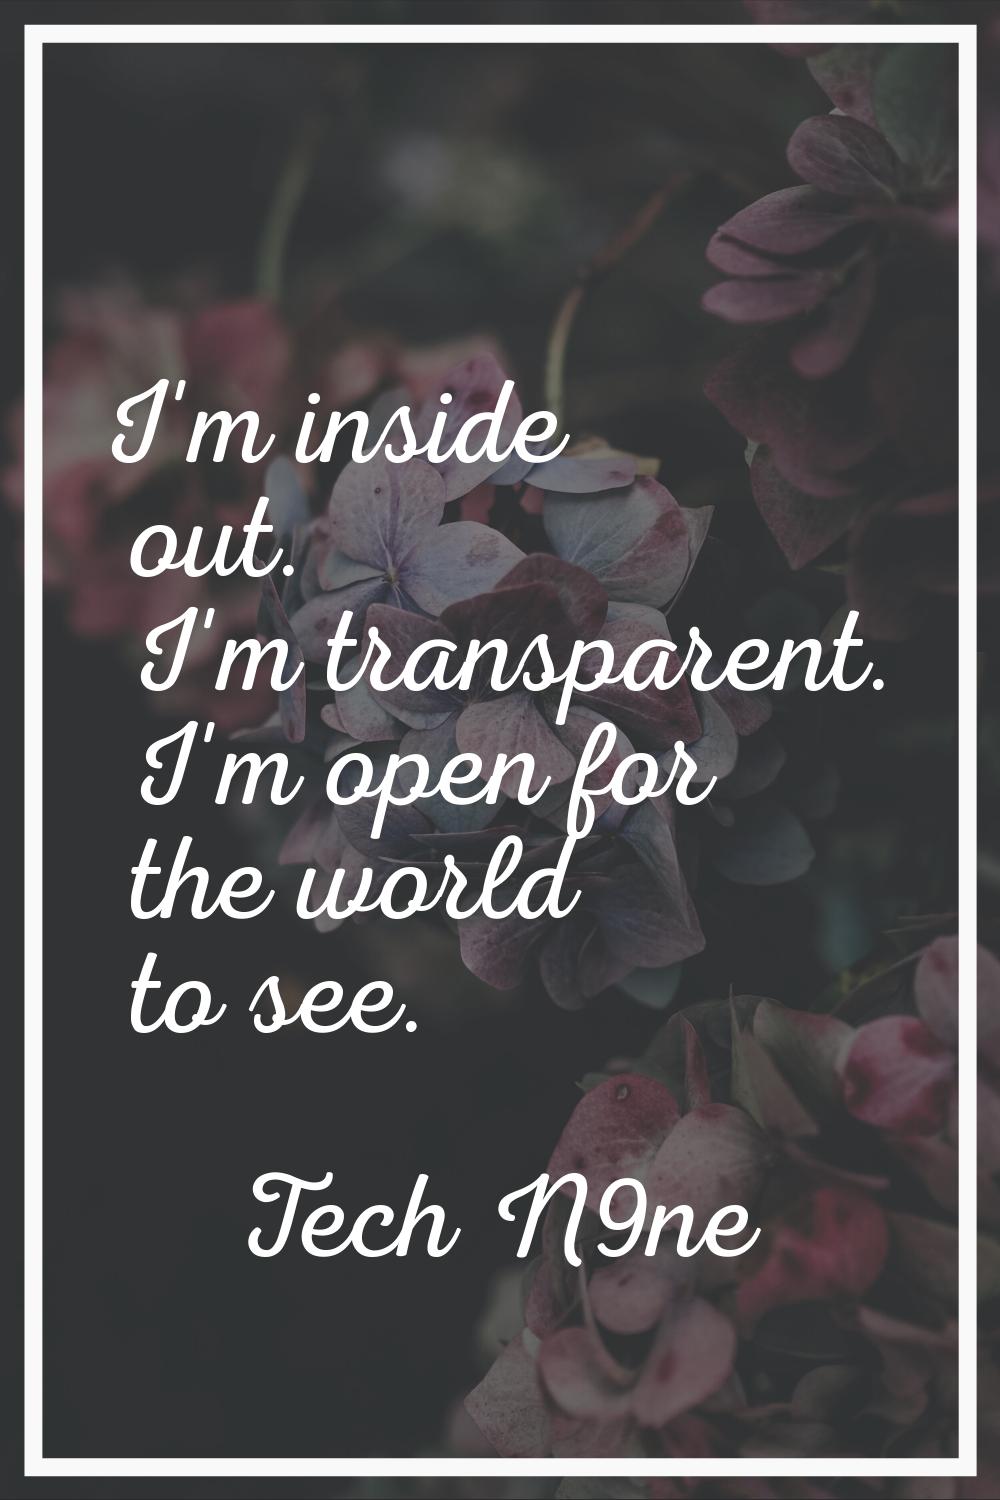 I'm inside out. I'm transparent. I'm open for the world to see.